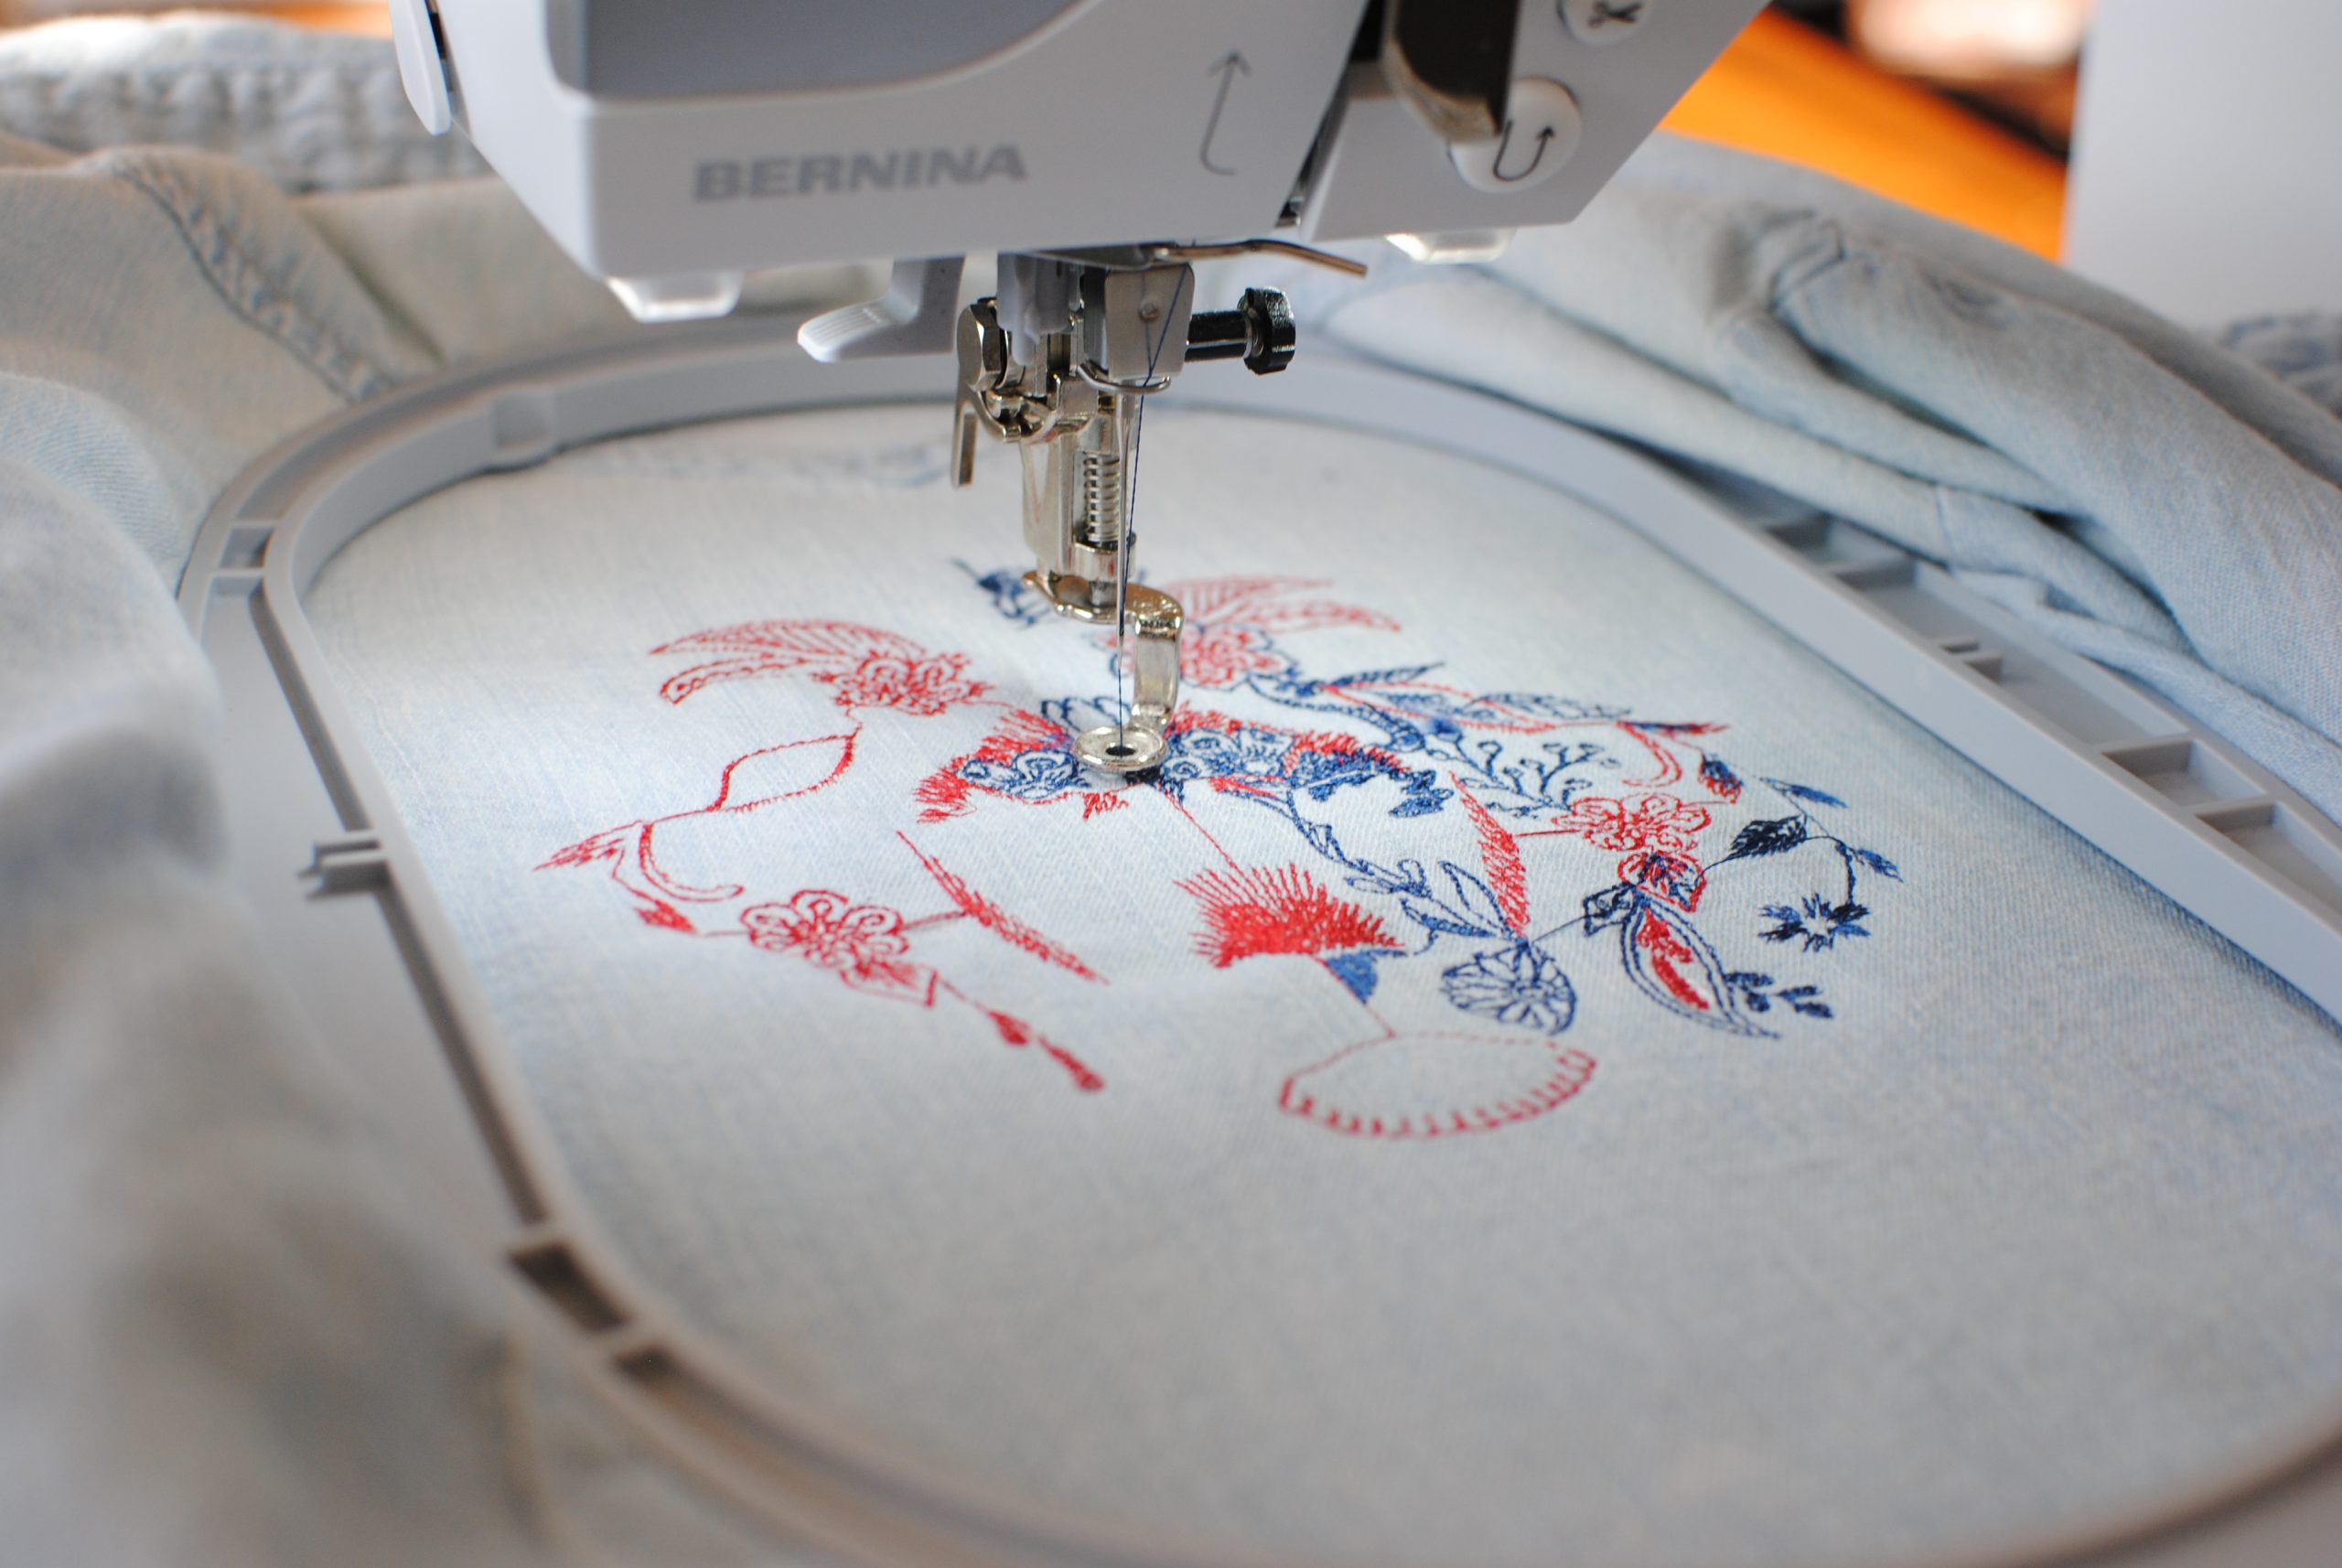 Customized embroidery